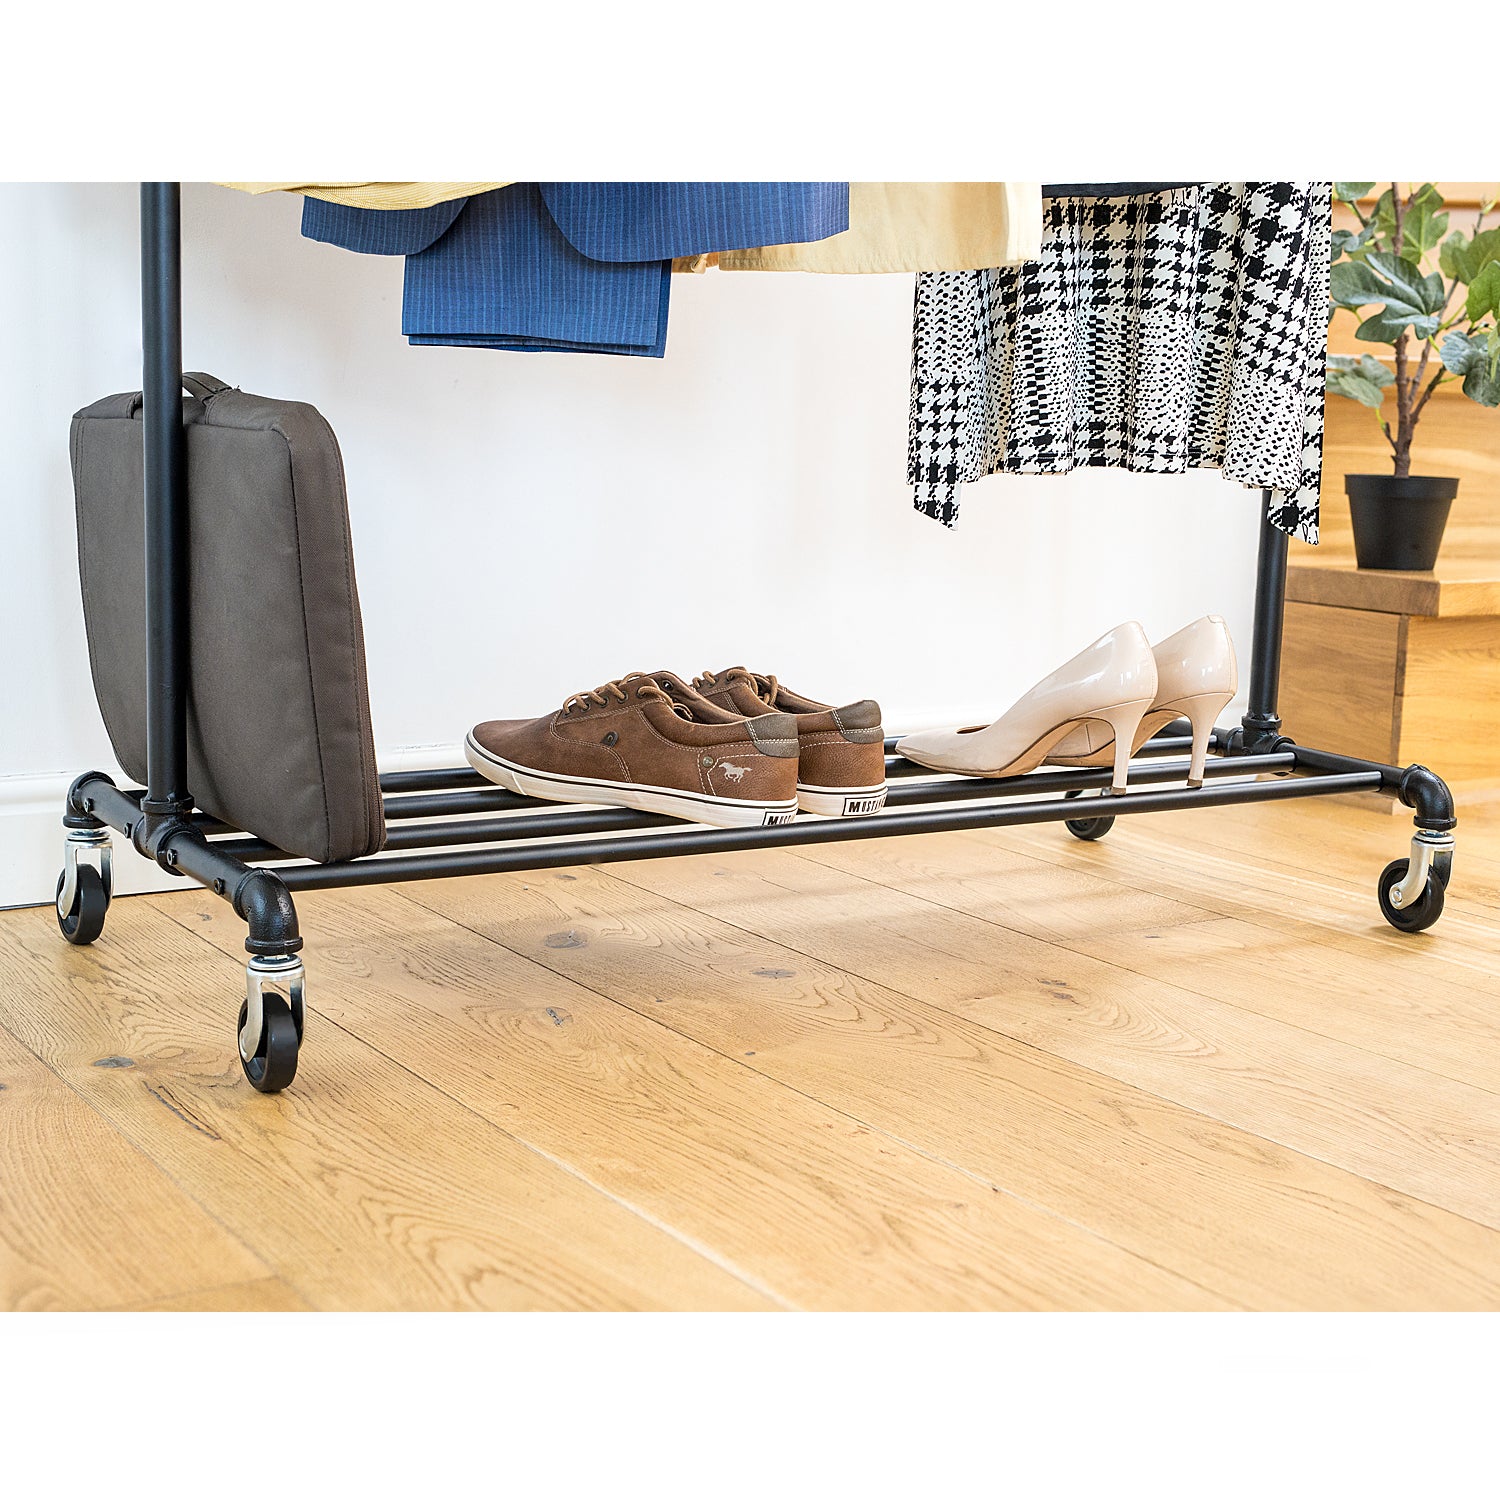 Clothes Rail Stable in Industrial Design, Heavy Duty Garment Rail with Shoe Rack, 100kg, Tatkraft Tube, 2